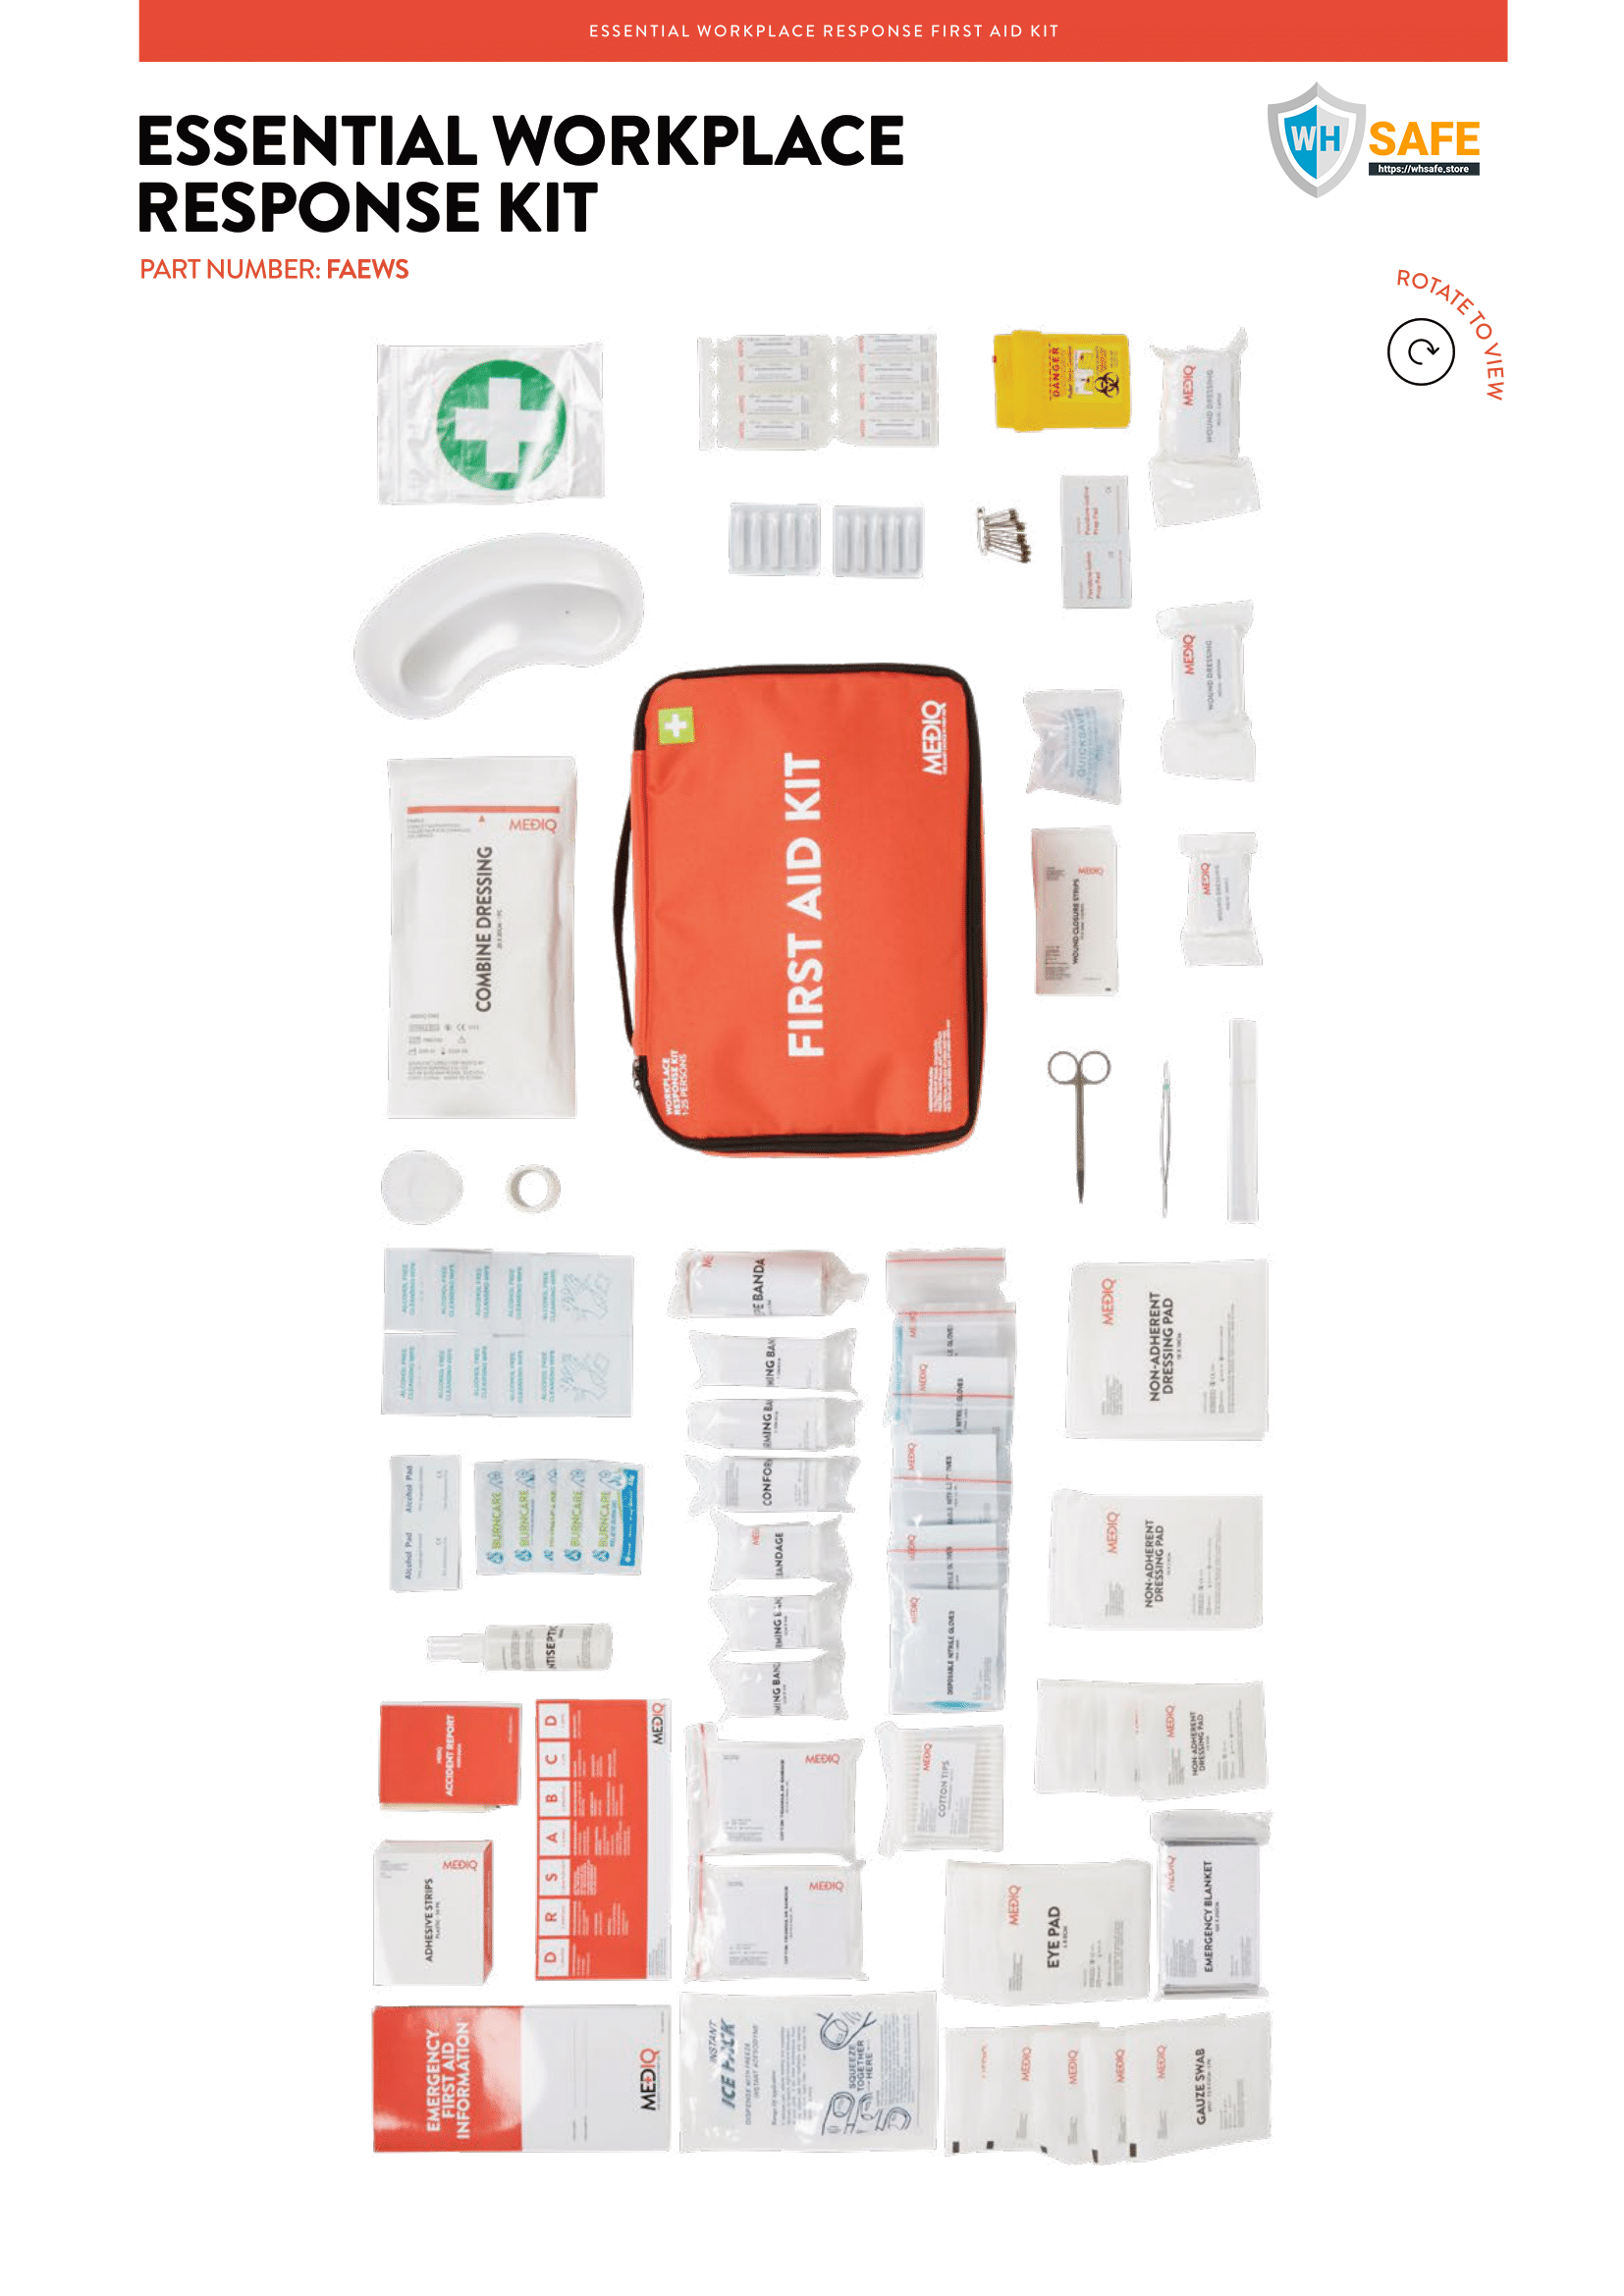 Mediq Workplace Response First-Aid Kit ( Soft Pack ) Low Risk - WHSAFETY